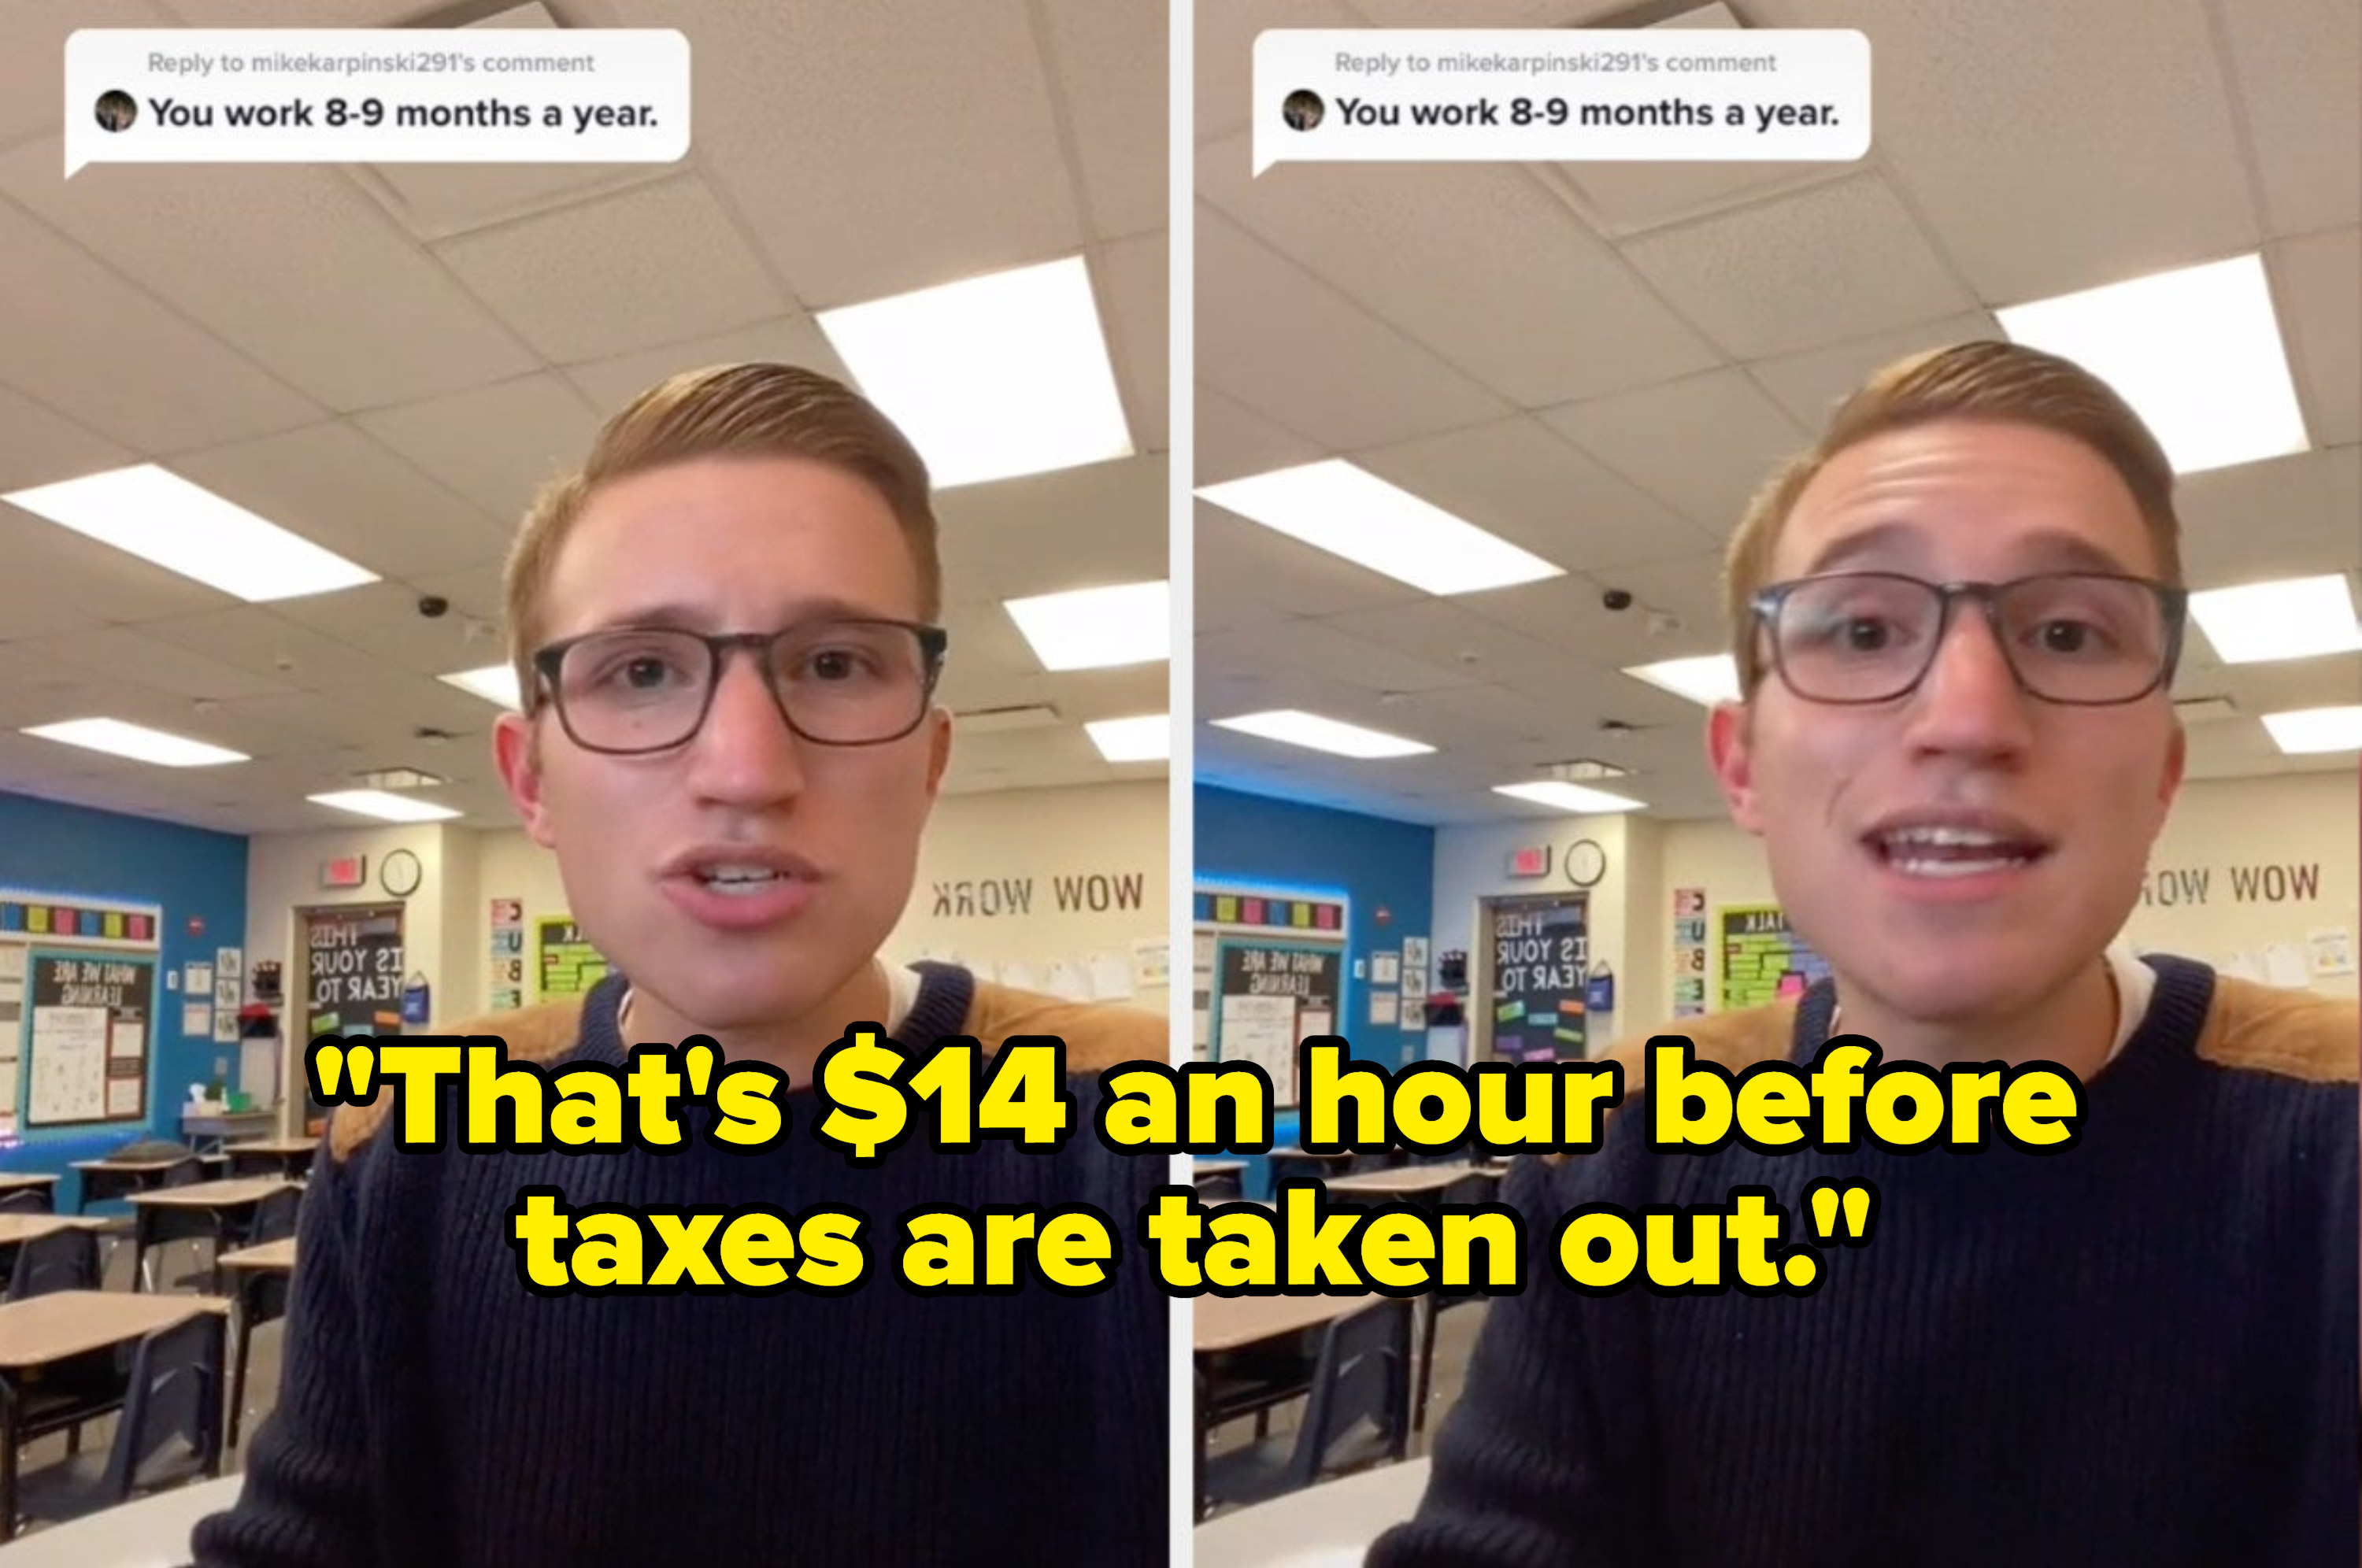 In the TikTok, Kyle adds: &quot;That&#x27;s $14 an hour before taxes are taken out&quot;